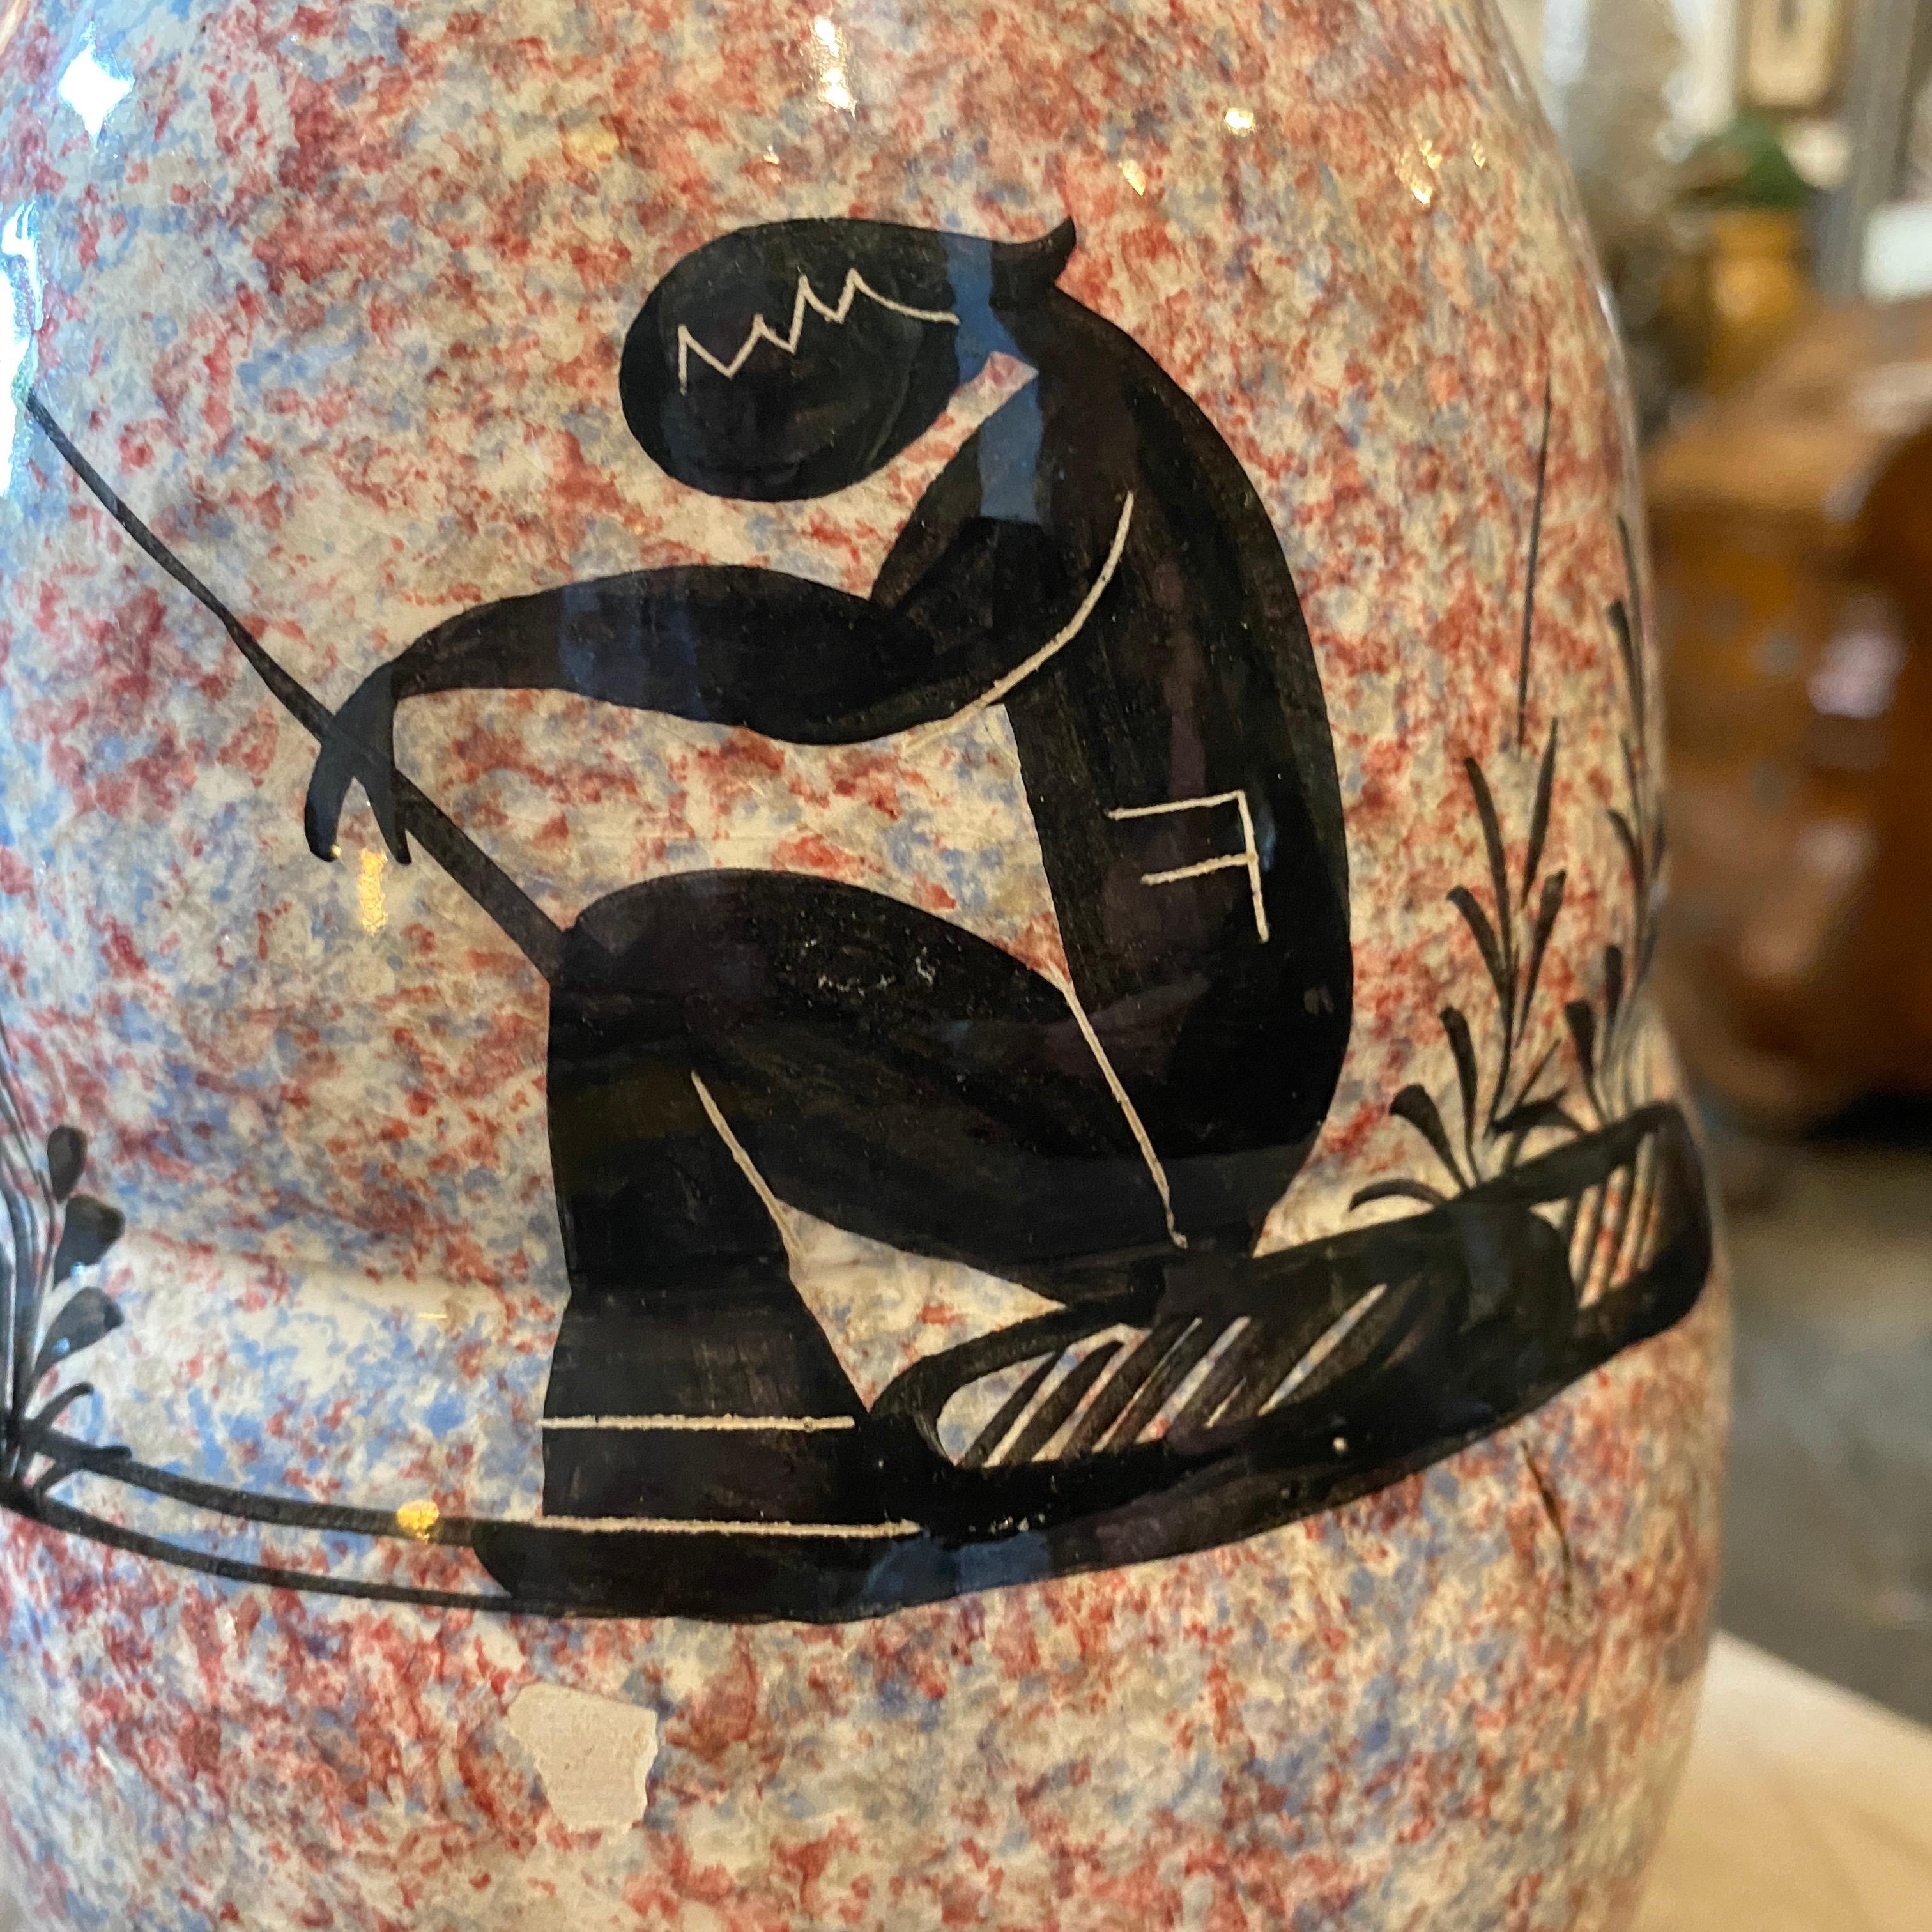 An Art Deco vase designed and manufacured in Italy in the Thirties by Bitossi, signs of use and age visible on the photo. This Vase by Bitossi is a splendid example of Italian ceramic craftsmanship during the Art Deco period. Bitossi is renowned for